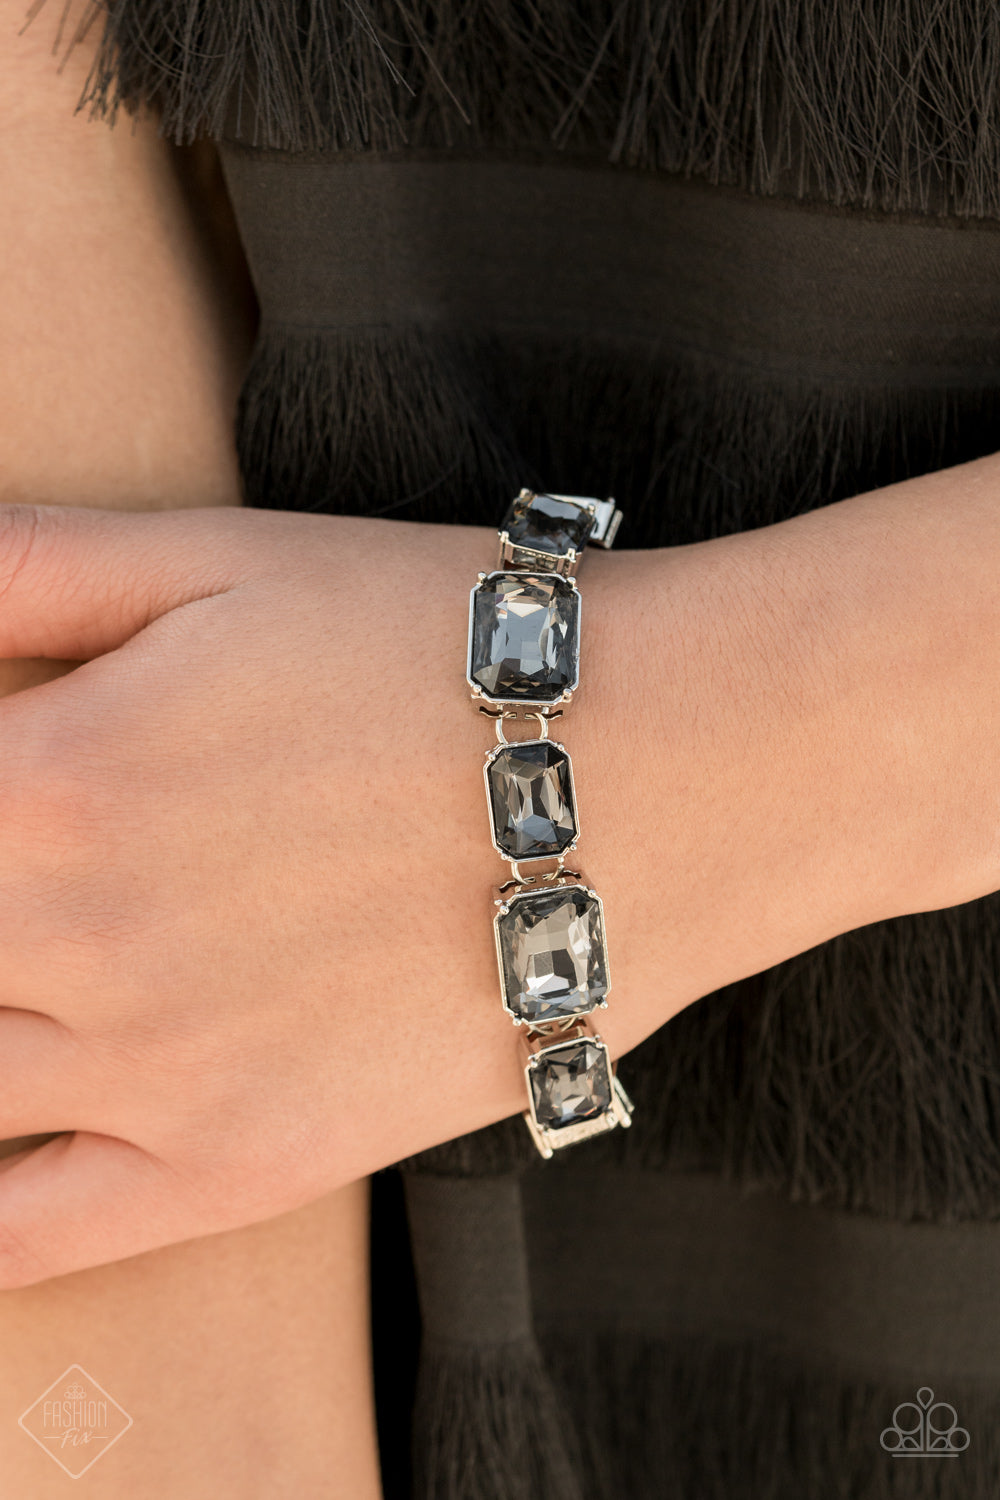 Fashion Fix set - Paparazzi Accessories - Smokey emerald cut gems, featuring 4 pieces in the collection.  Magnificent Musings January Fashion Fix collection.